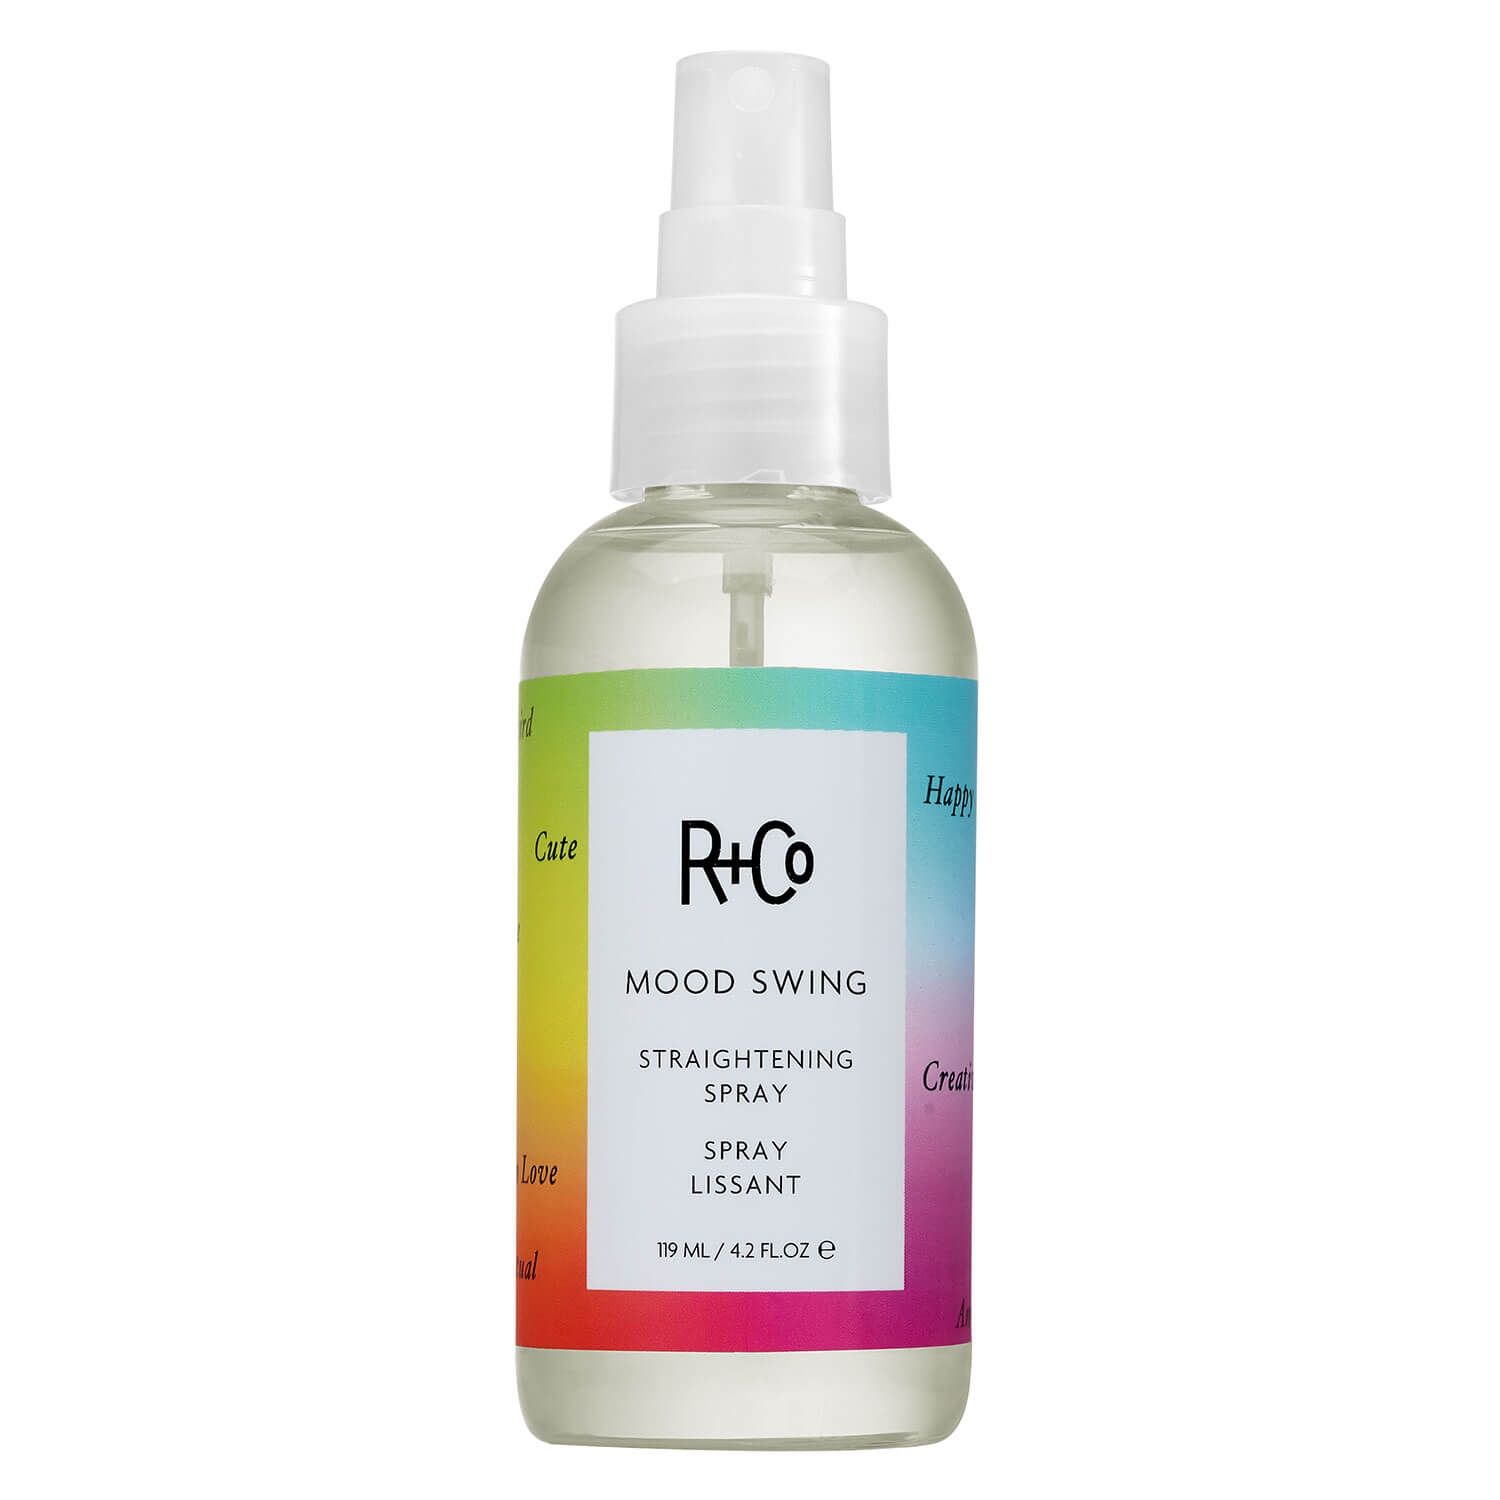 Product image from R+Co - Mood Swing Straightening Spray